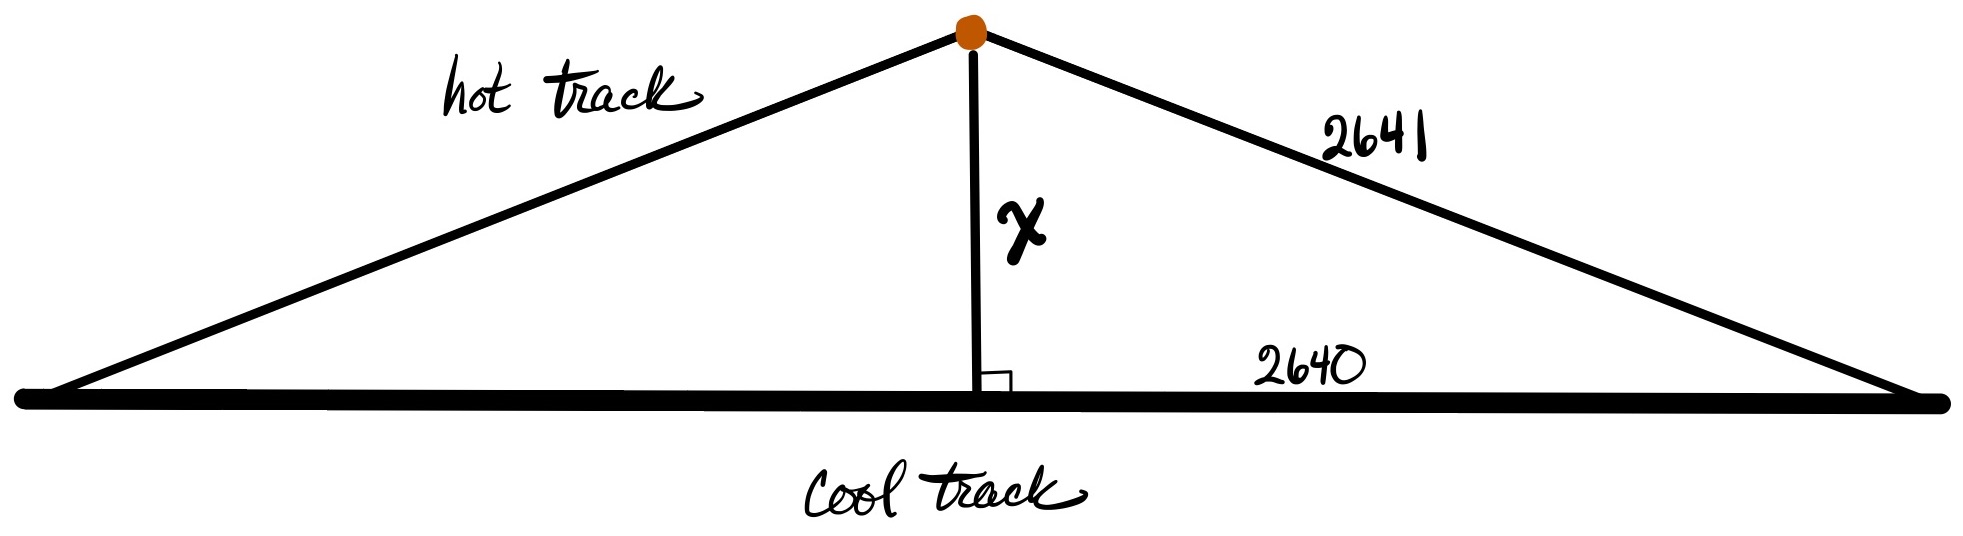 wide isosceles triangle. Vertical is dropped from top vertex and marked x. Bottom edge is labeled "cool track." Upper left edge is labeled "hot track." Upper right edge is labeled 2641. Half of bottom edge is labeled 2640.